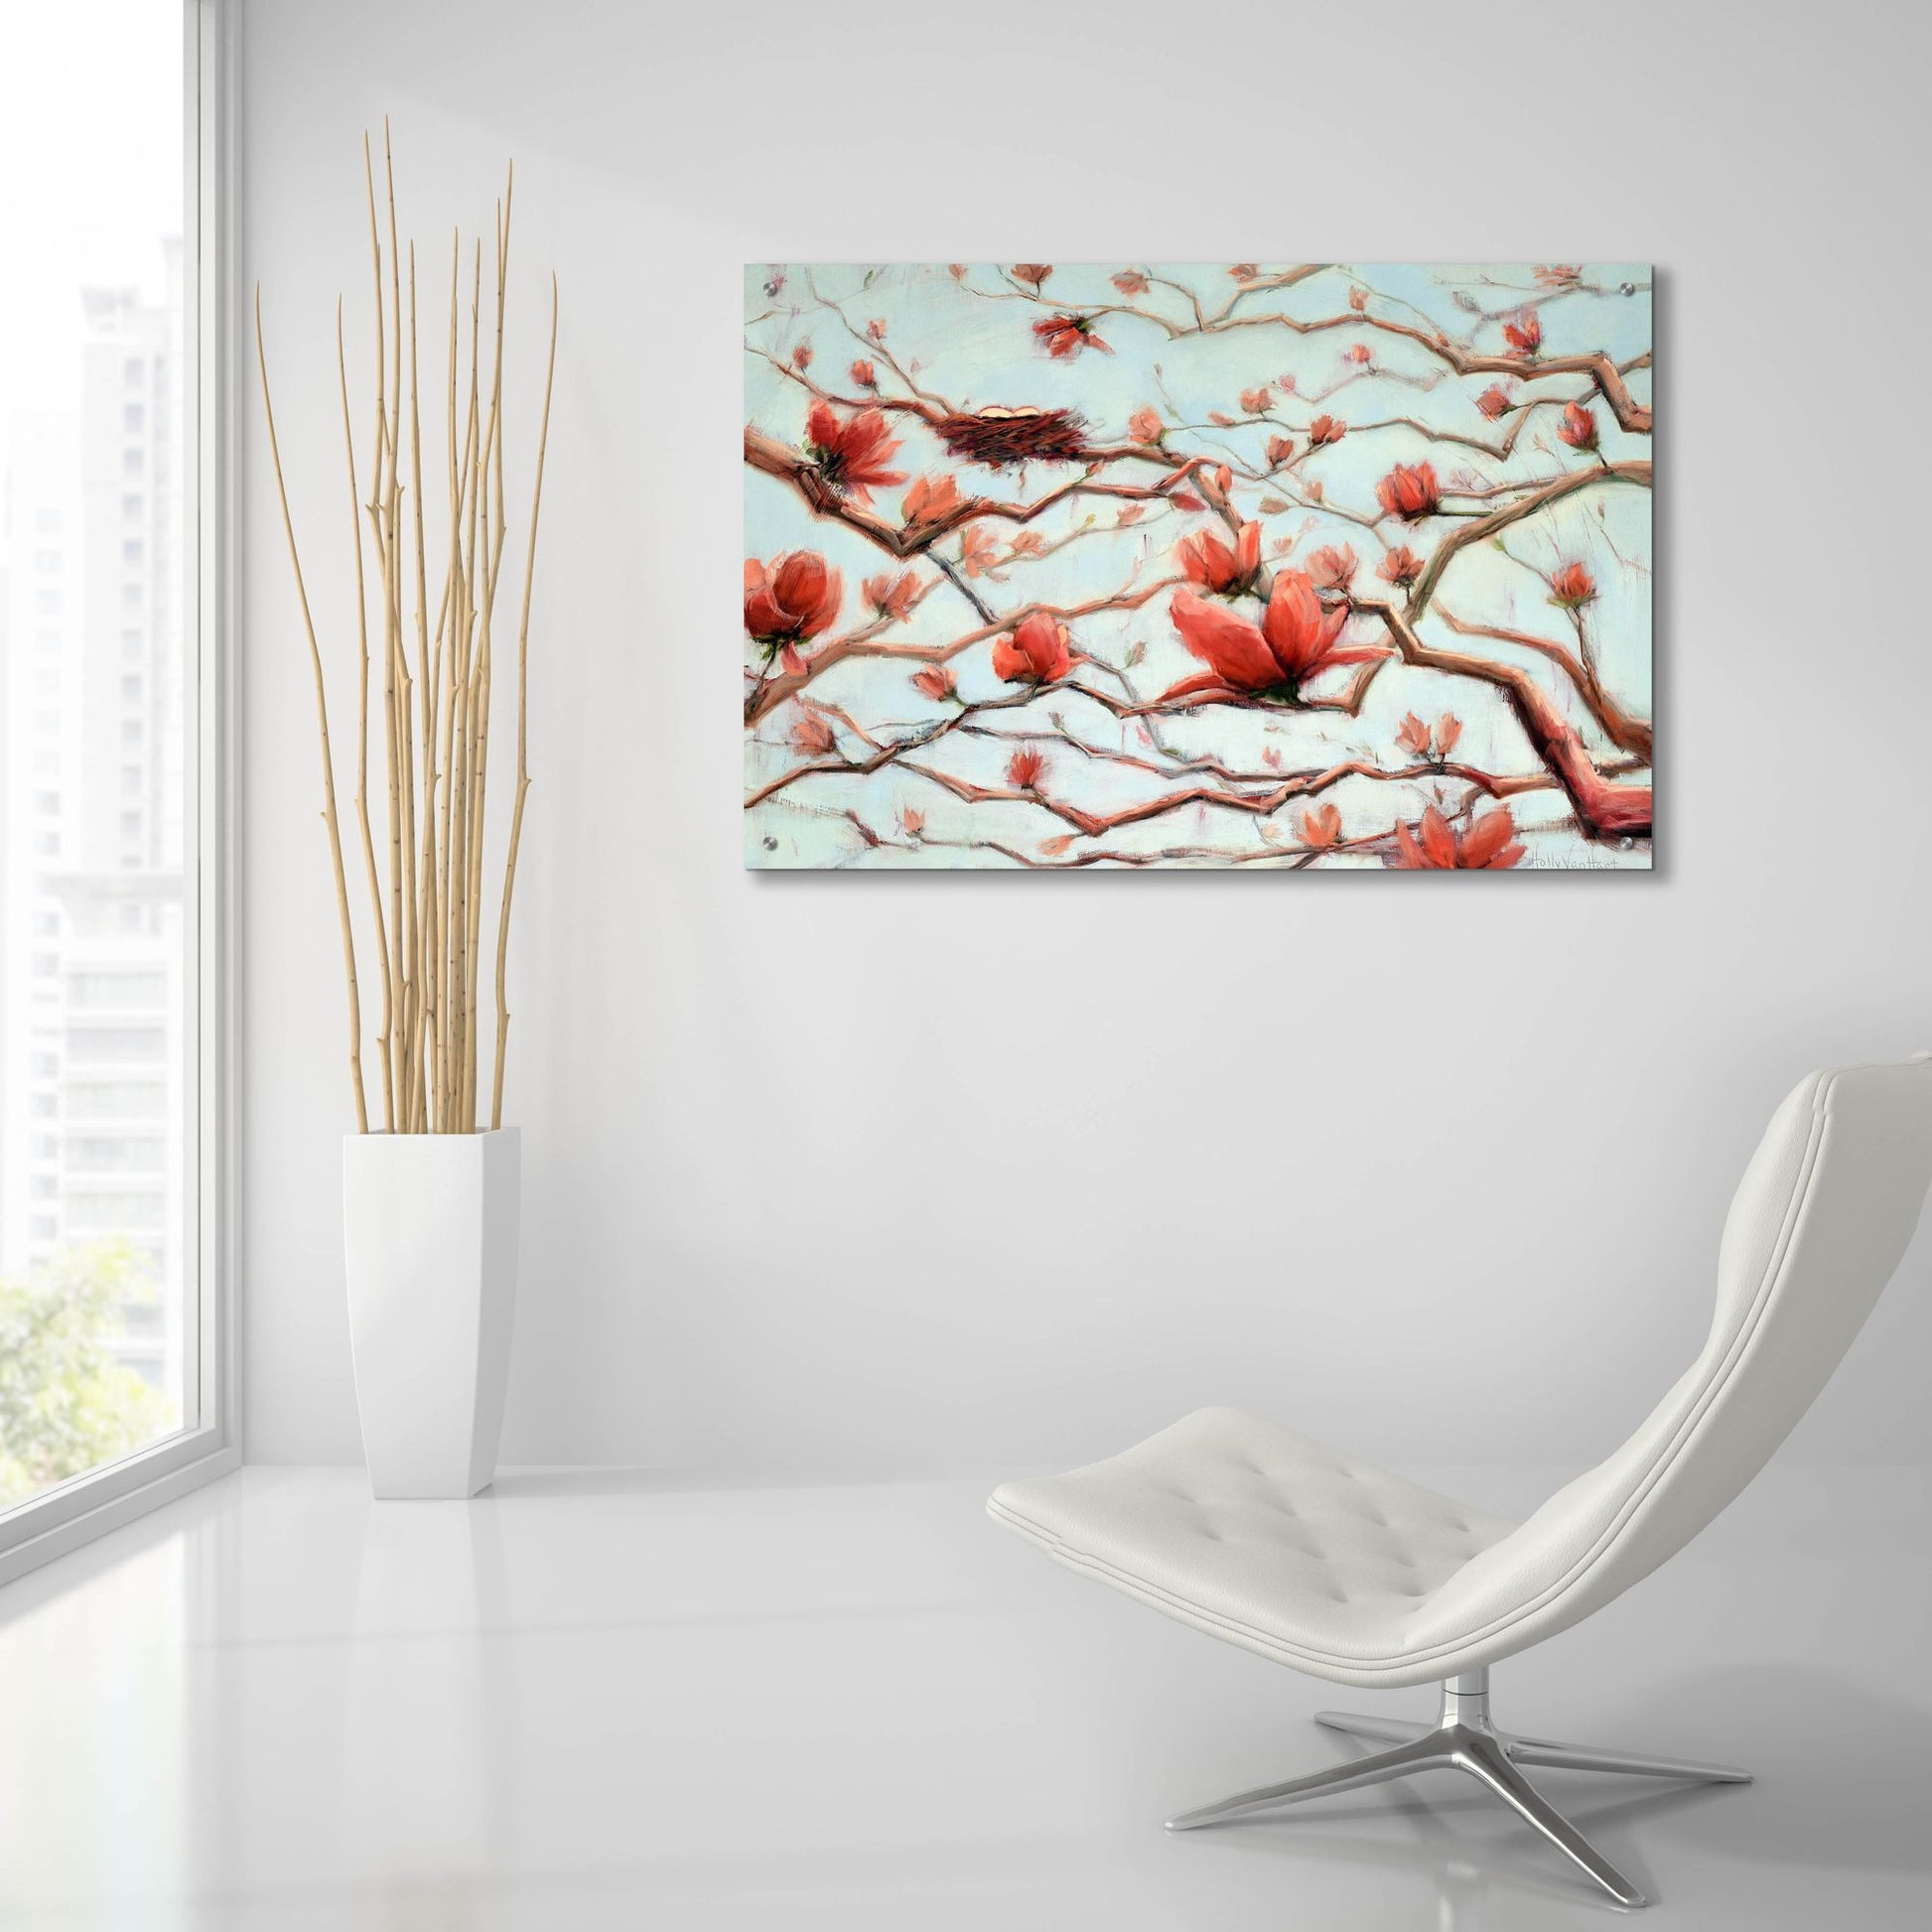 Epic Art 'Possibilities In Full Bloom' by Holly Van Hart, Acrylic Glass Wall Art,36x24